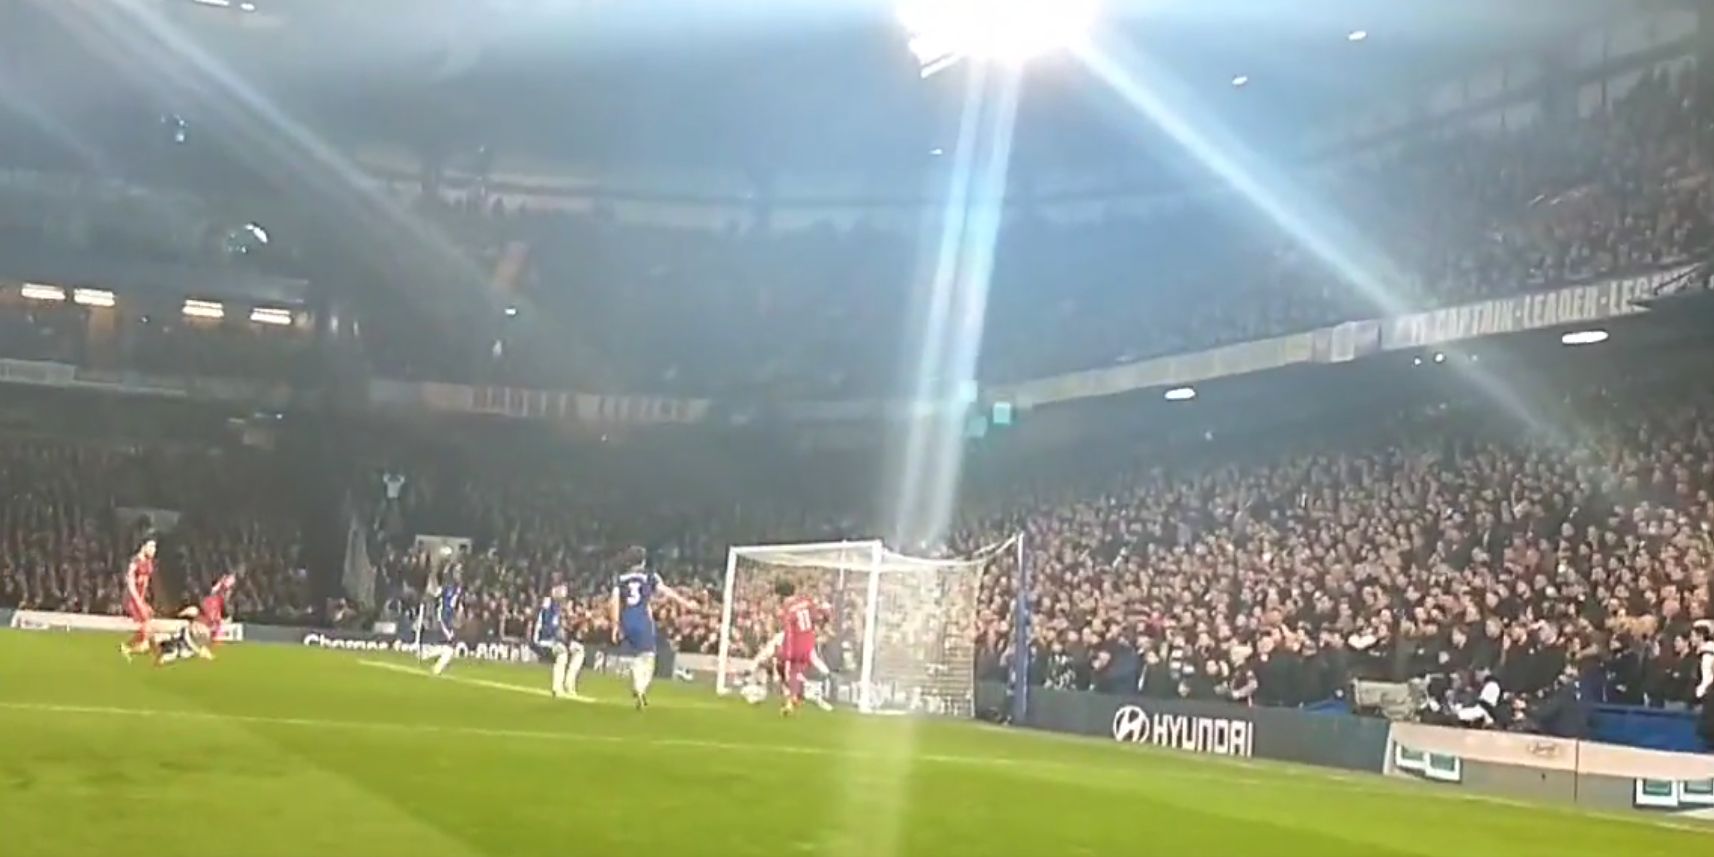 (Video) New fan camera angle of Mo Salah’s Stamford Bridge goal further shows how brilliant it was